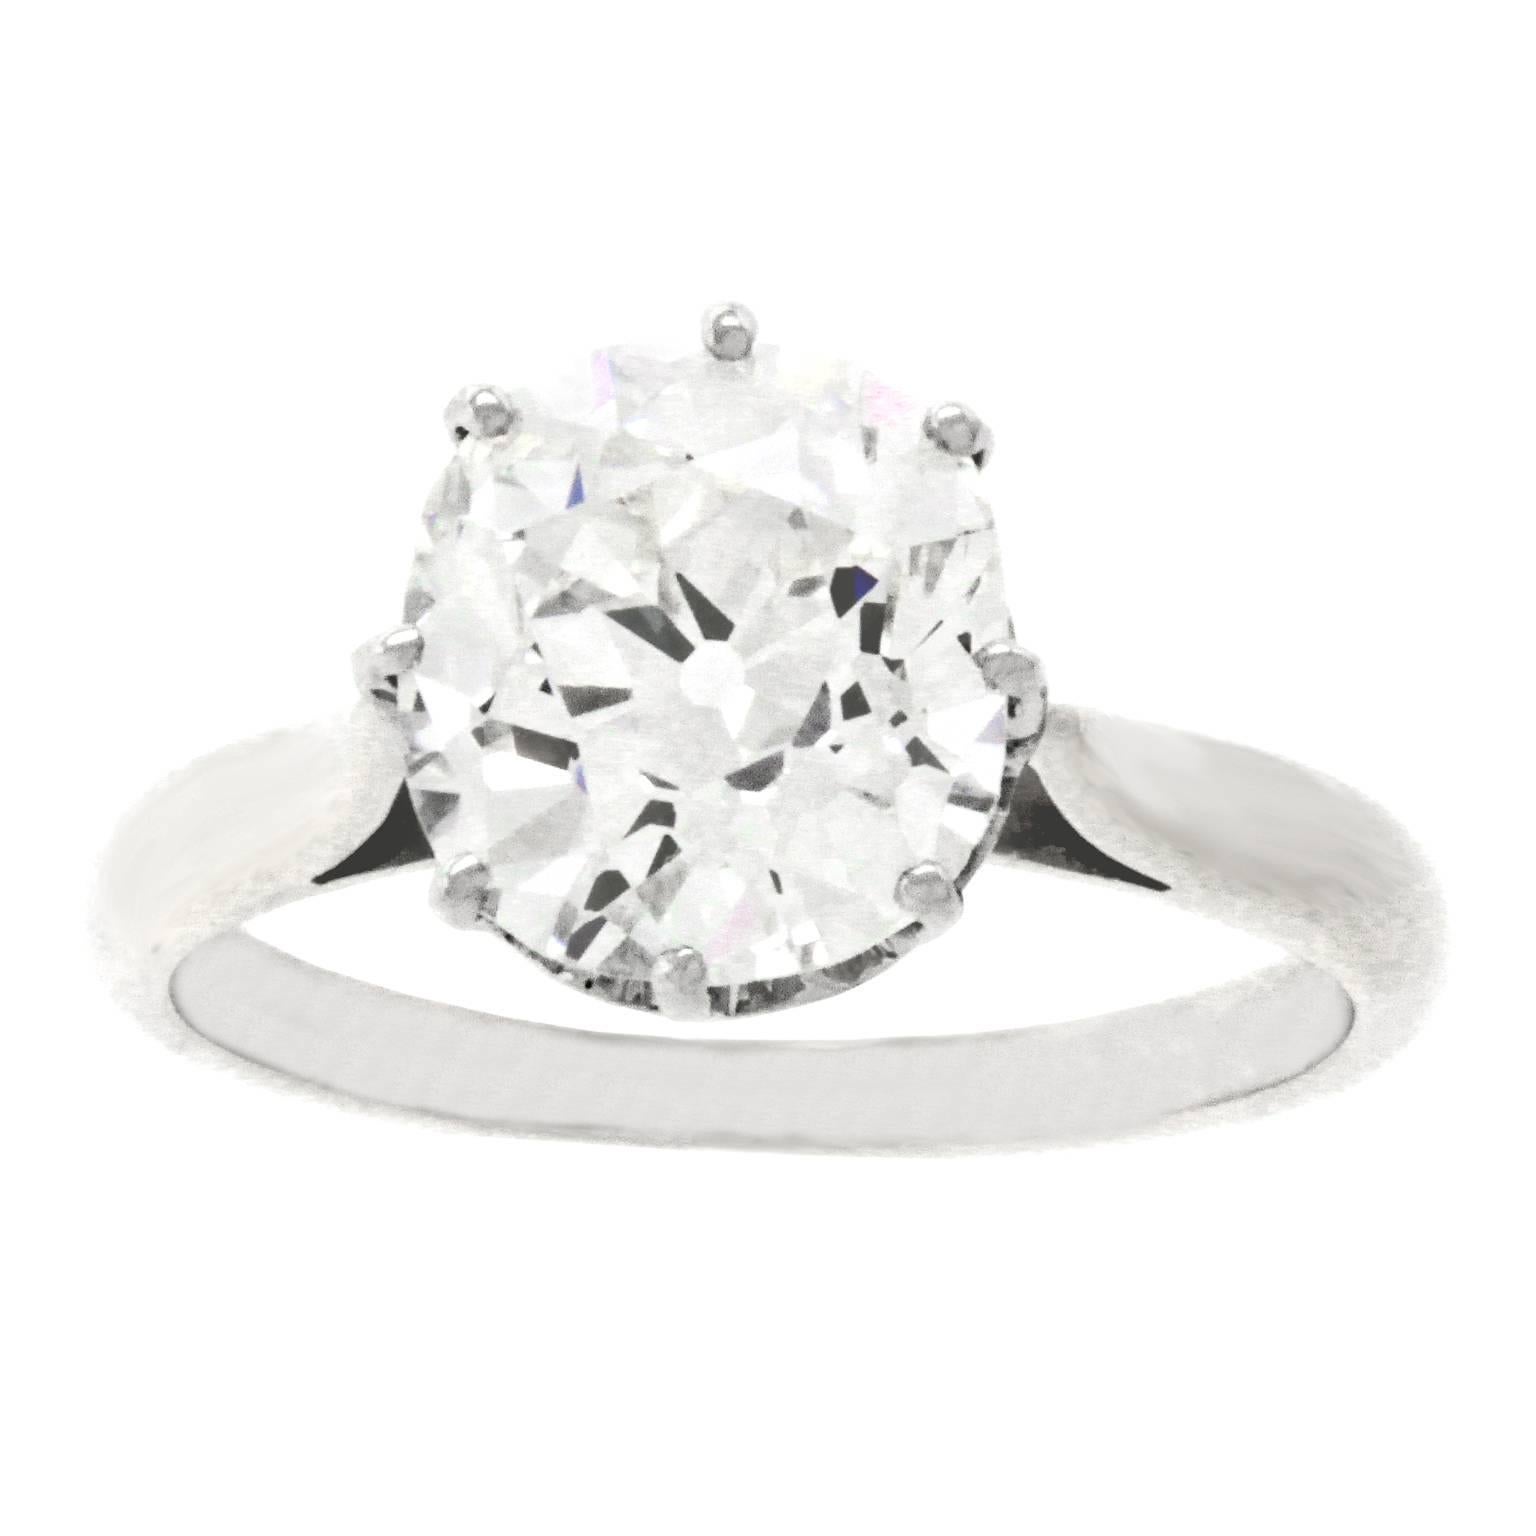 Circa 1920s, platinum and 18k, France.   The crowning glory of this elegant French Art Deco ring is its brilliant white 3.15 carat mine-cut diamond (GIA Report #GIA Report #5172846402, J color, VS1 clarity). Lively and bright, superb clarity gives